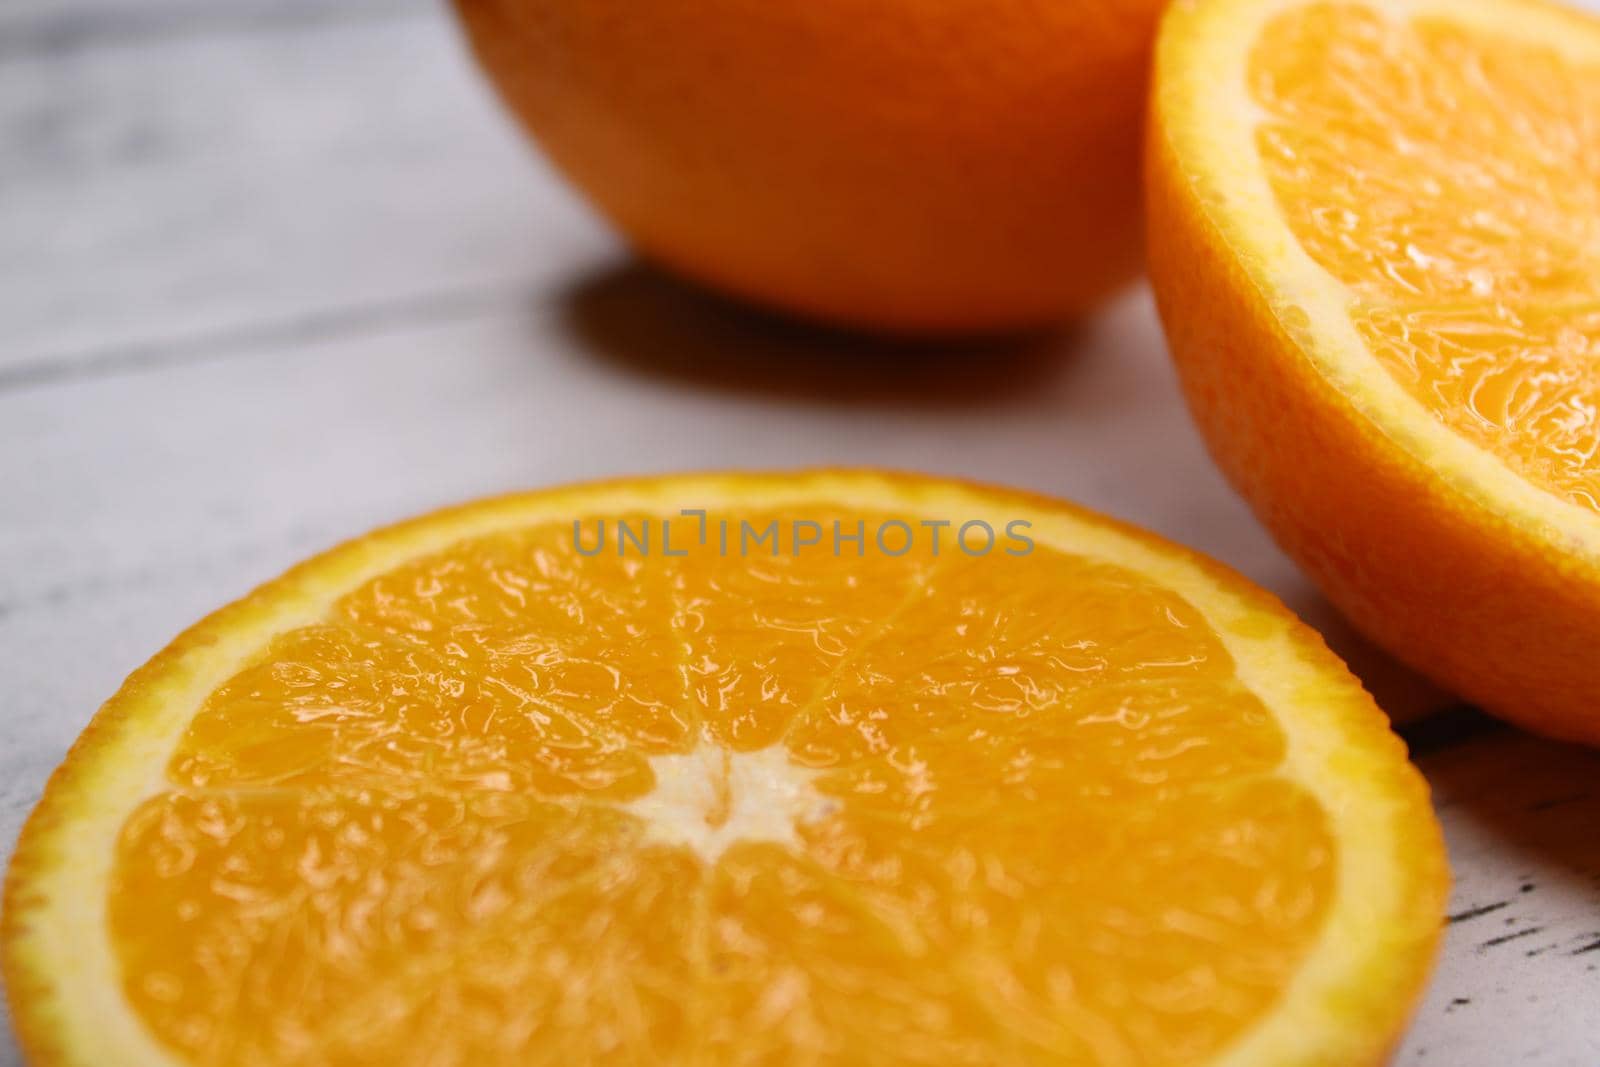 Close-up of slices and halves of oranges on a wooden table..